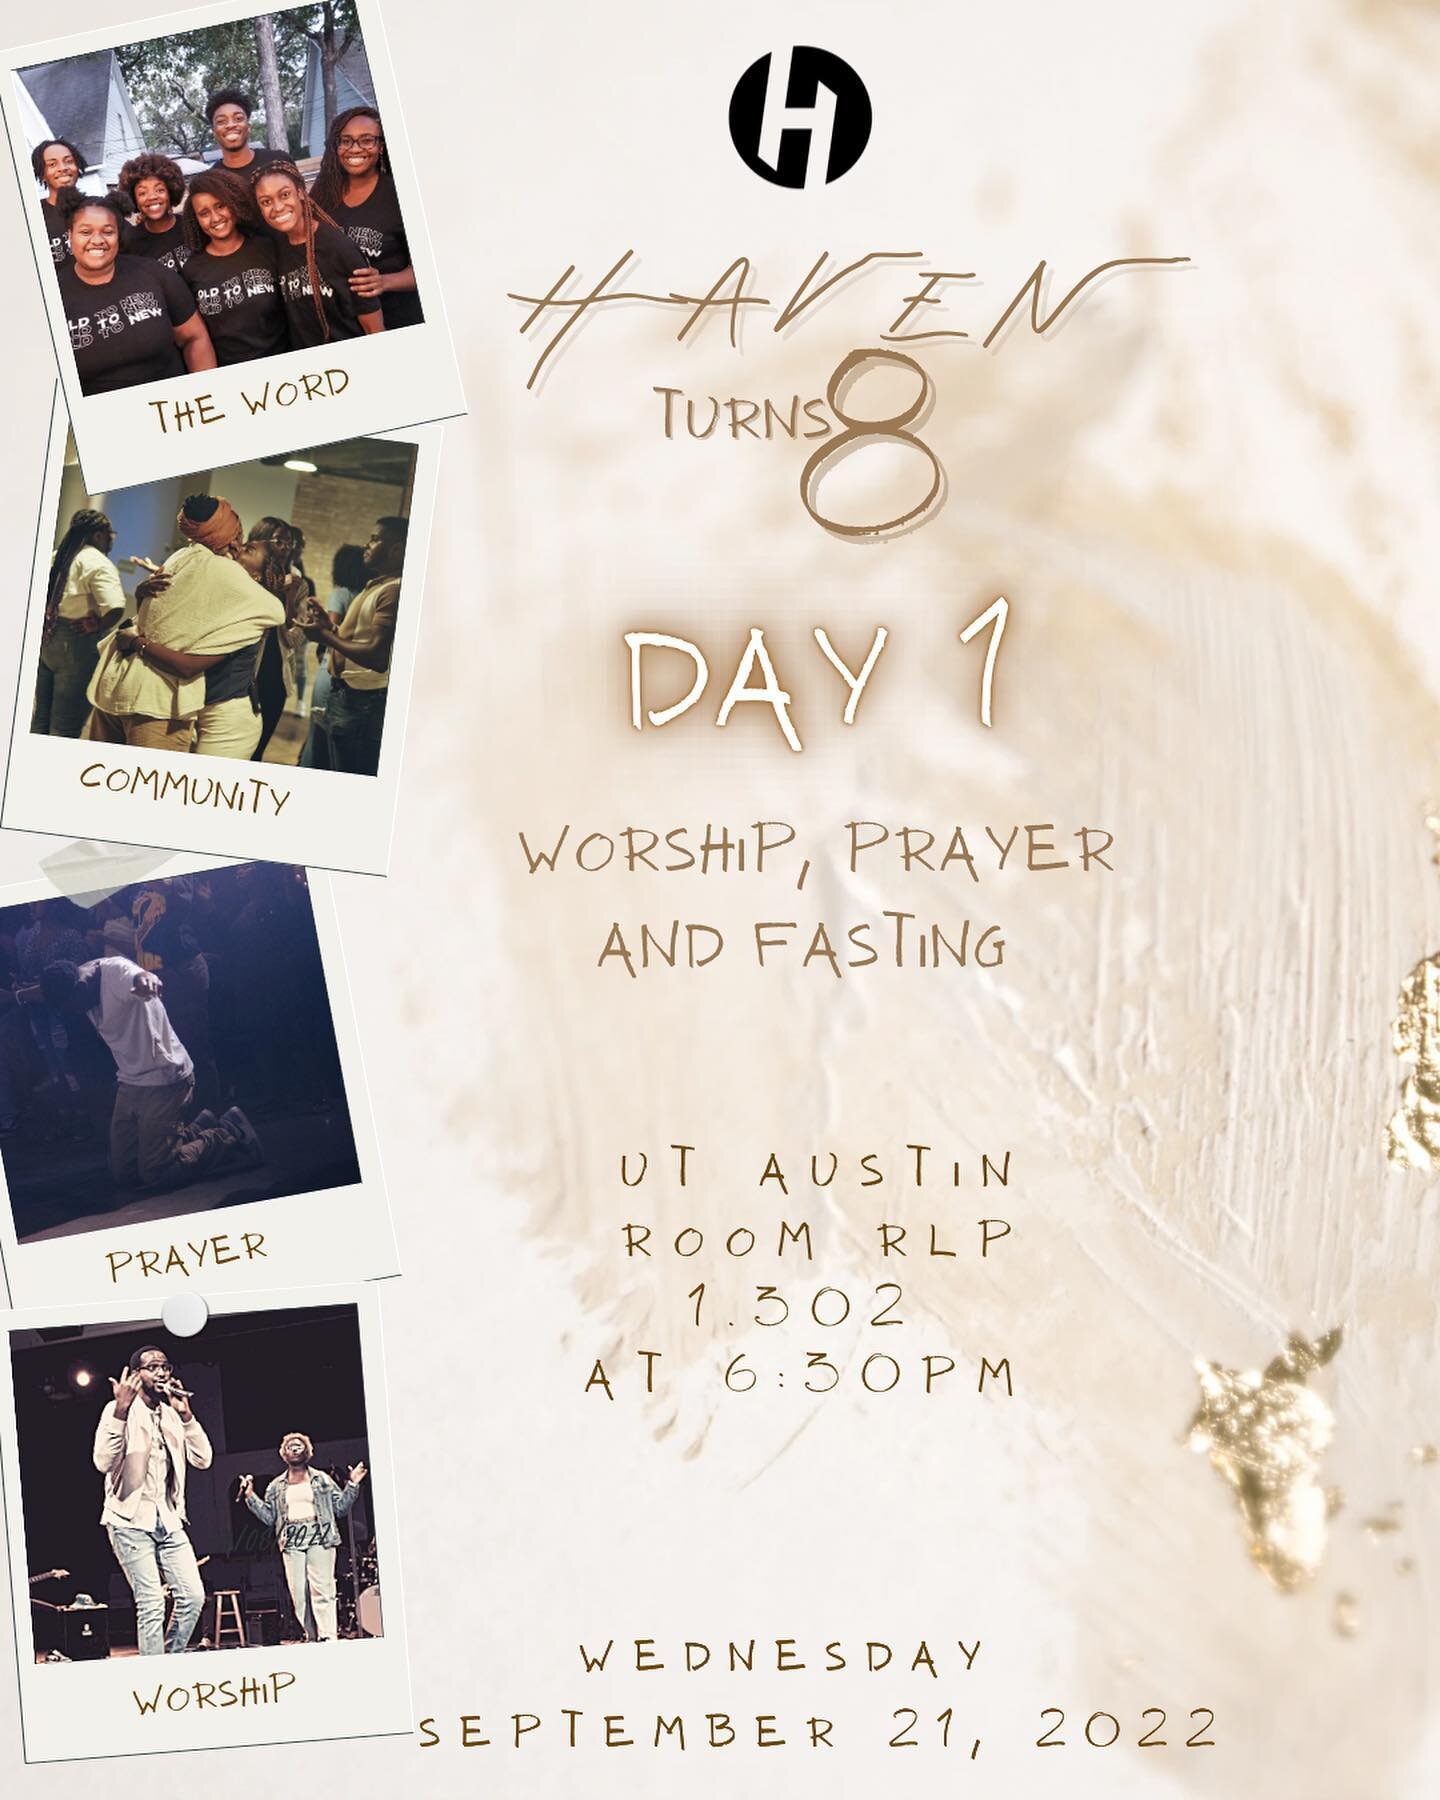 ***ROOM CHANGE to RLP 1.302***

TODAY is DAY 1!!🥳 HAVEN student fellowship is excited to pray, worship, and celebrate our 8th anniversary with everyone at RLP 1.106 at 6:30pm!!🙏🏾🎊

Tag a friend you are coming out with and let them know about the 